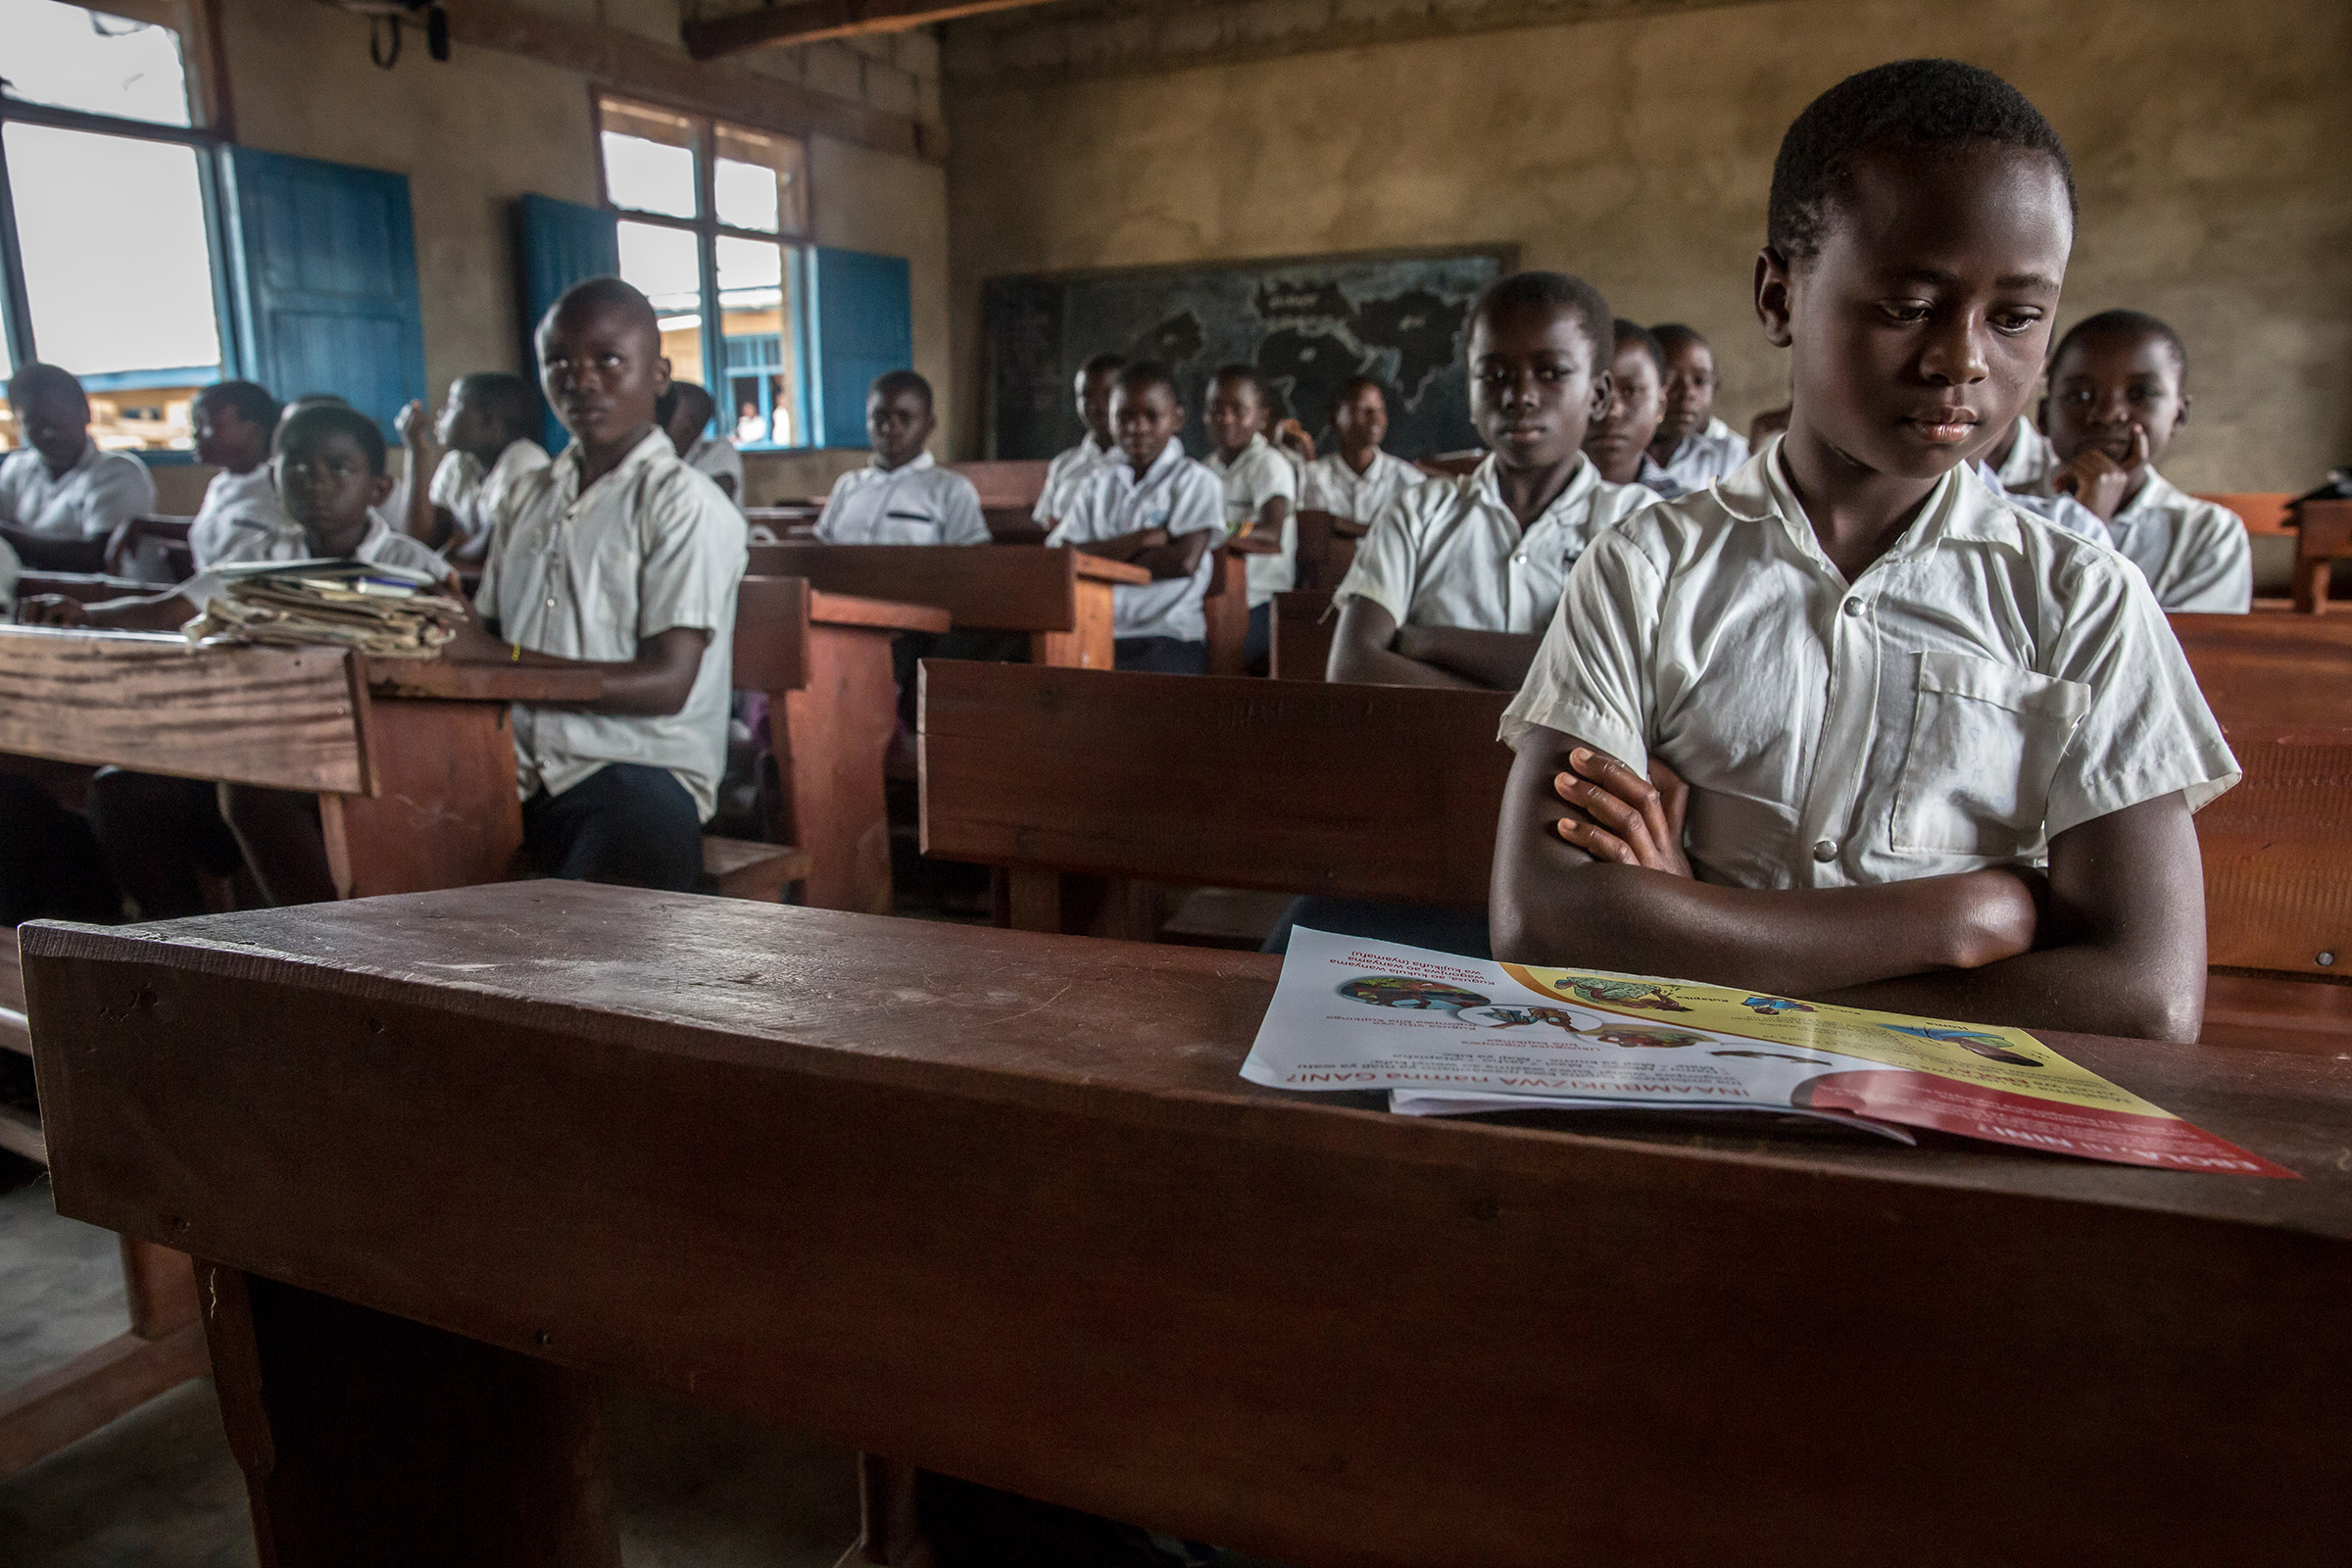 Ebola being taught in school in the DRC